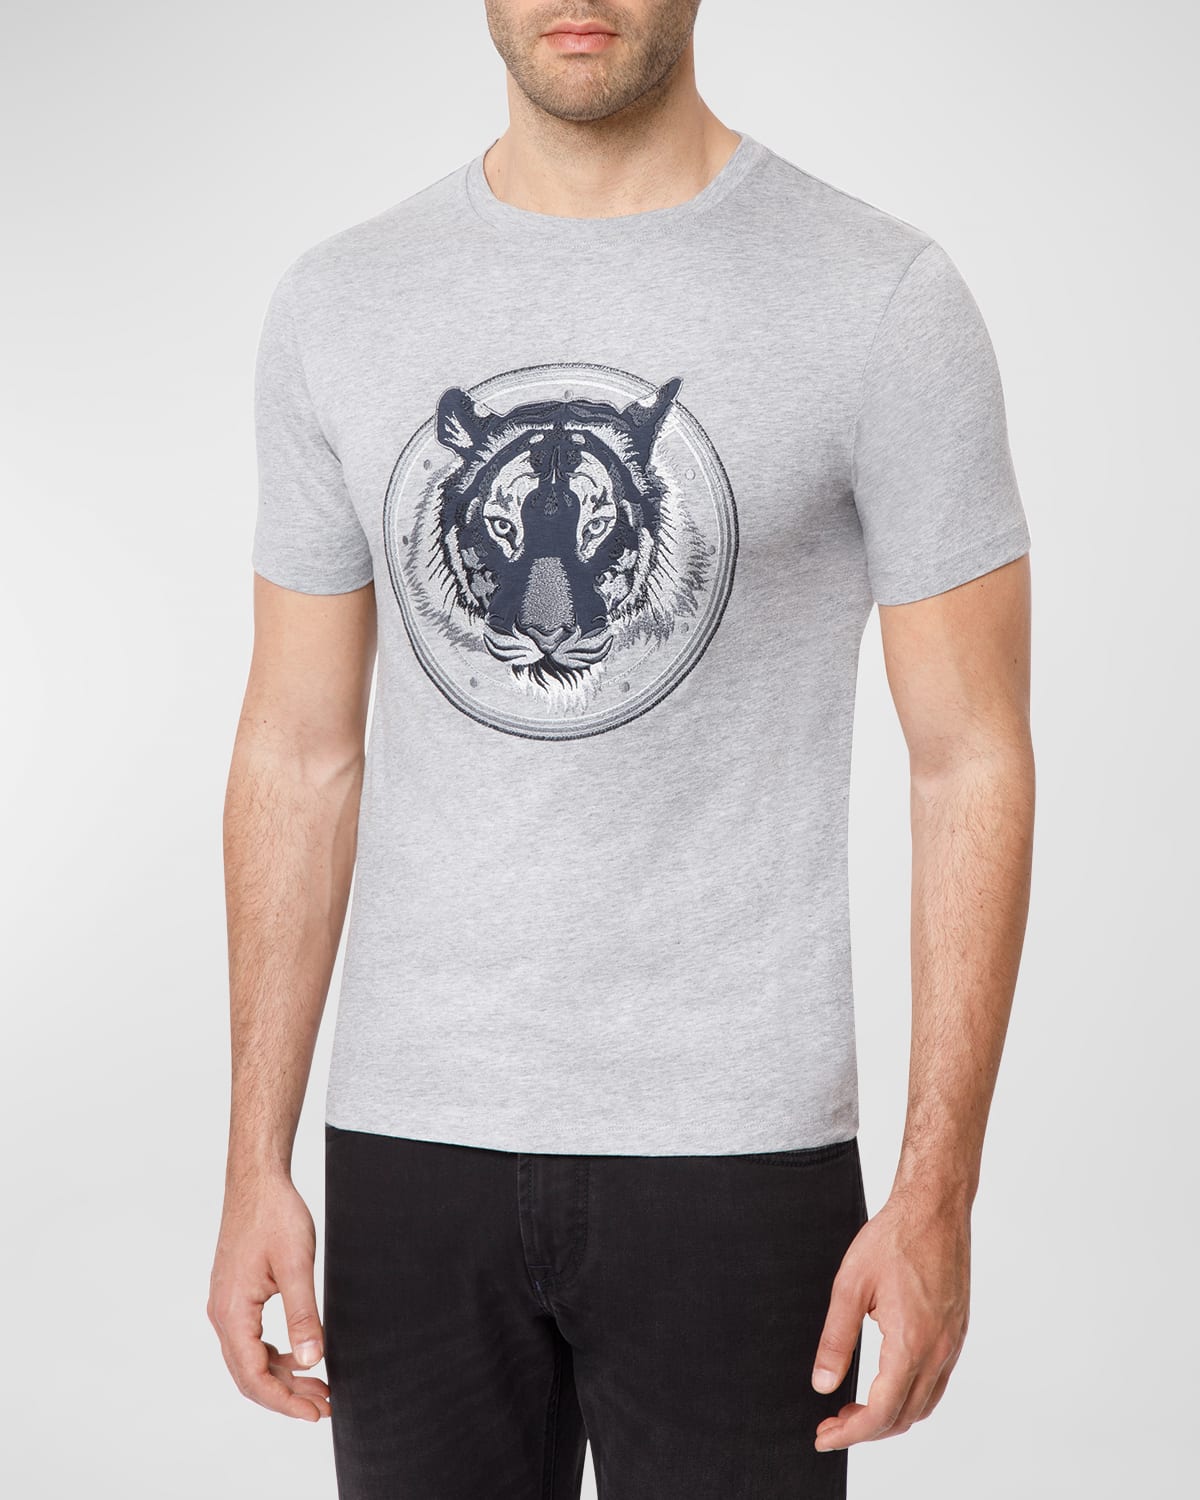 Men's Embroidered Tiger Head T-Shirt